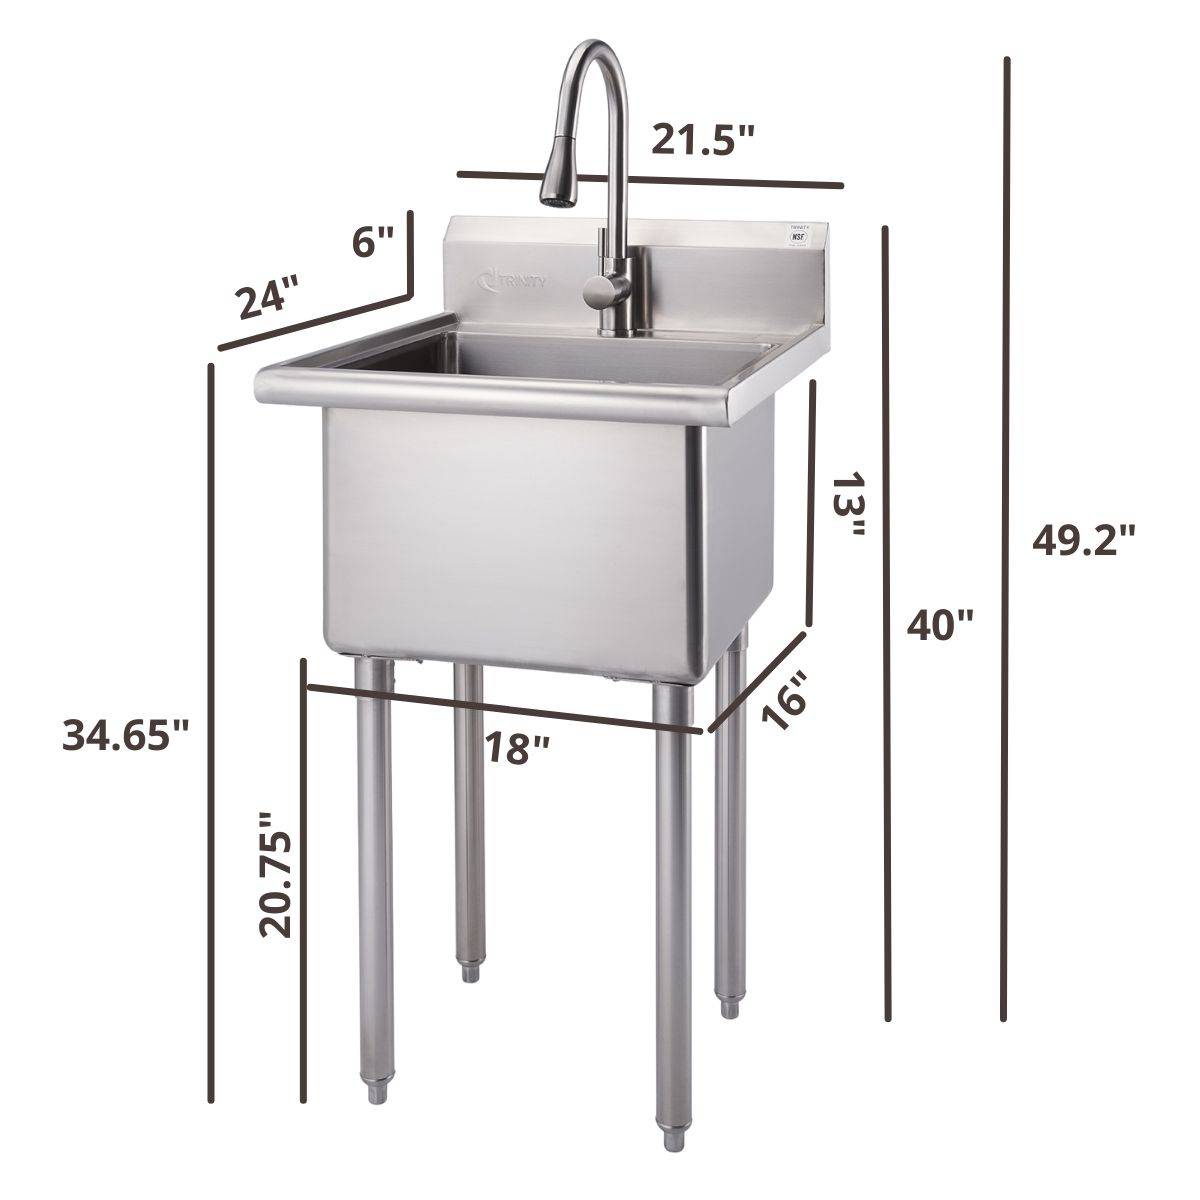 dimensions of the sink